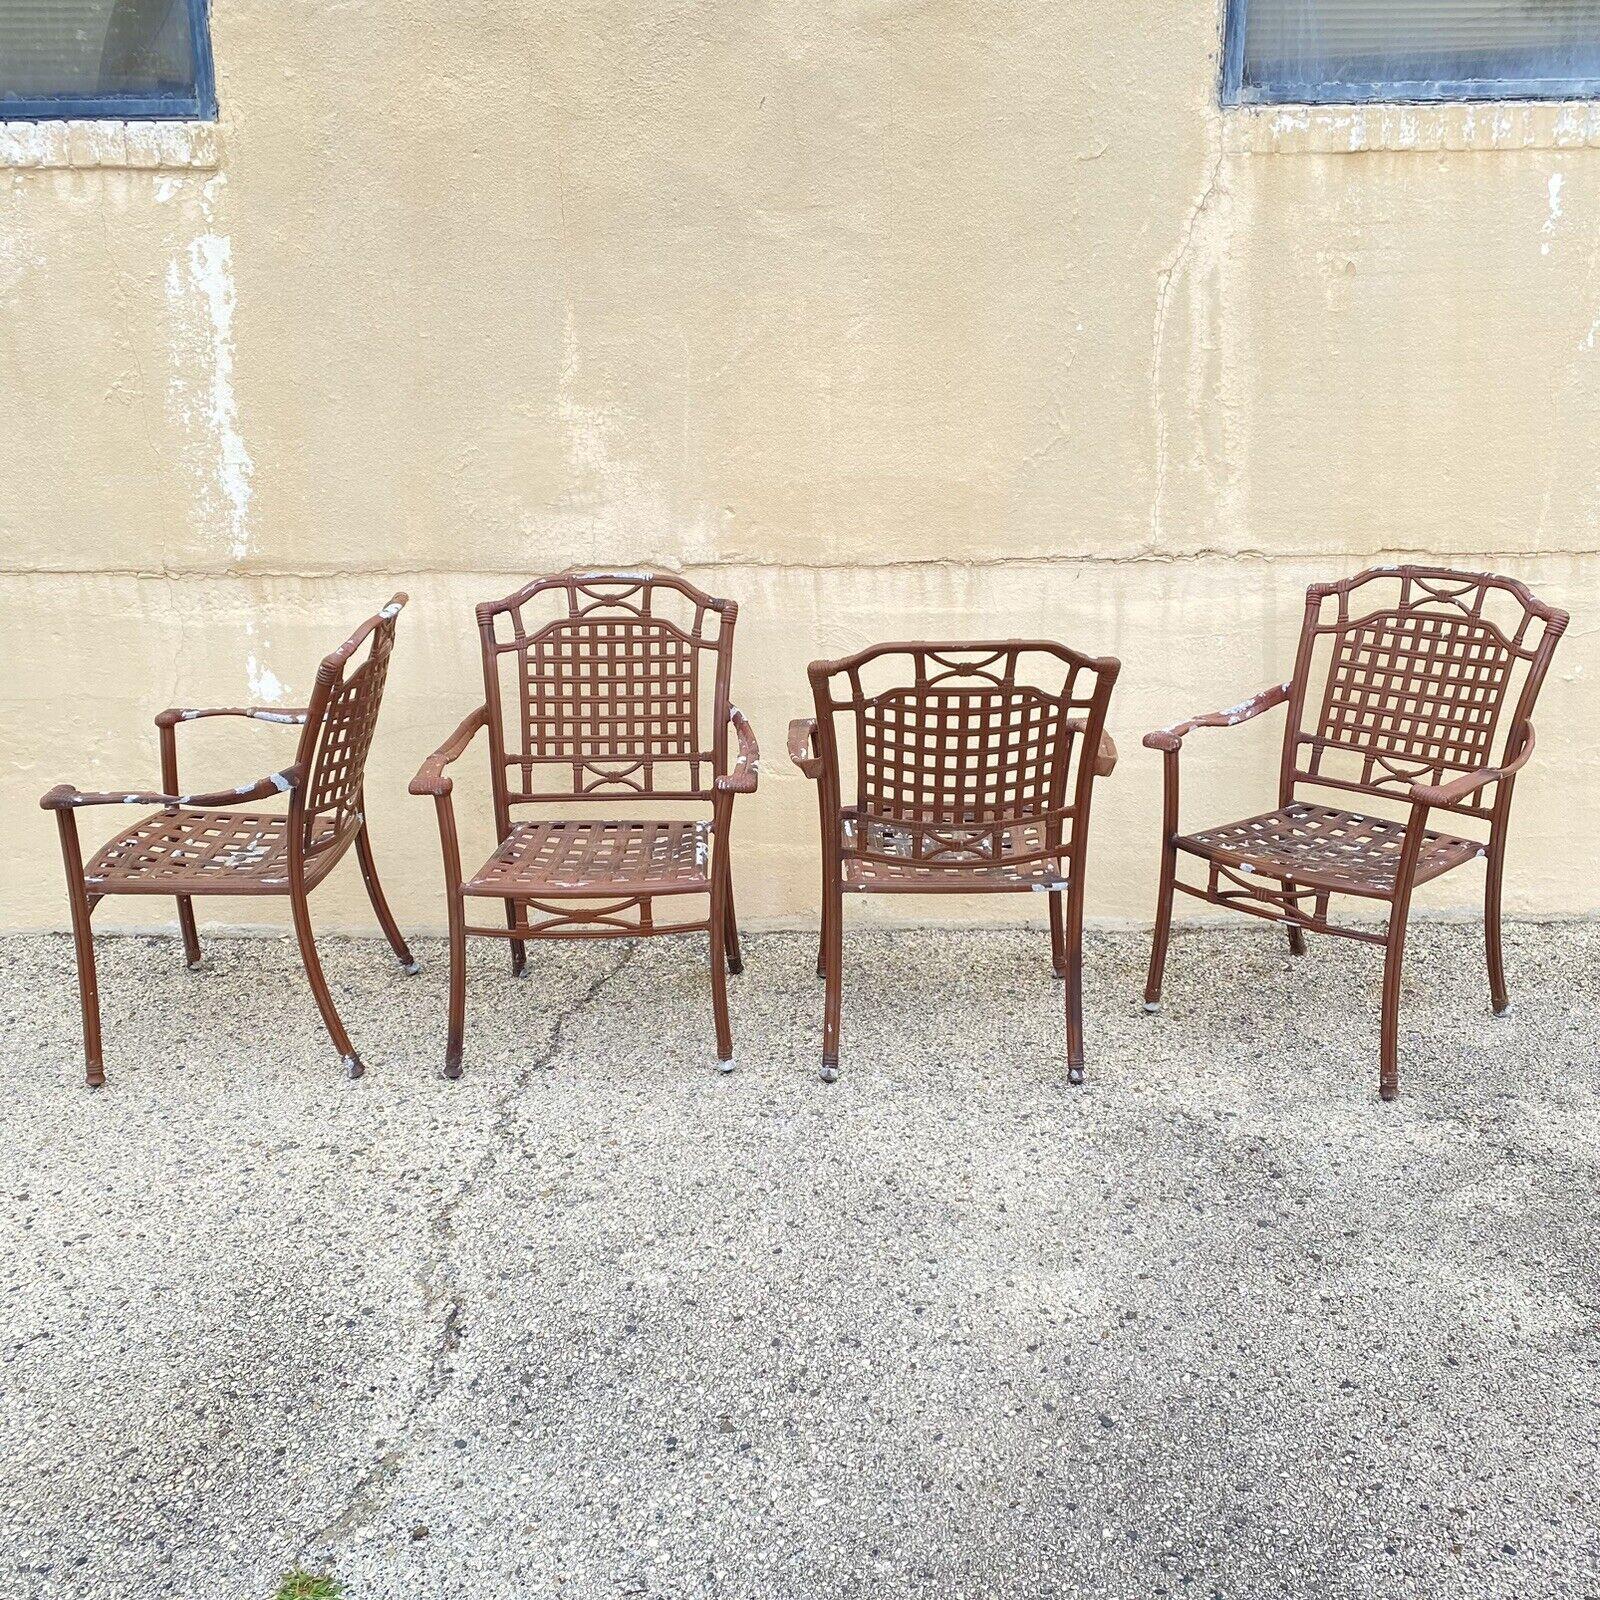 Cast Aluminum Basket Weave Lattice Rattan Patio Outdoor Arm Chairs - Set of 4. Item features stacking frames, cast aluminum construction, great style and form. Circa Late 20th - 21st Century. Measurements: 36.5